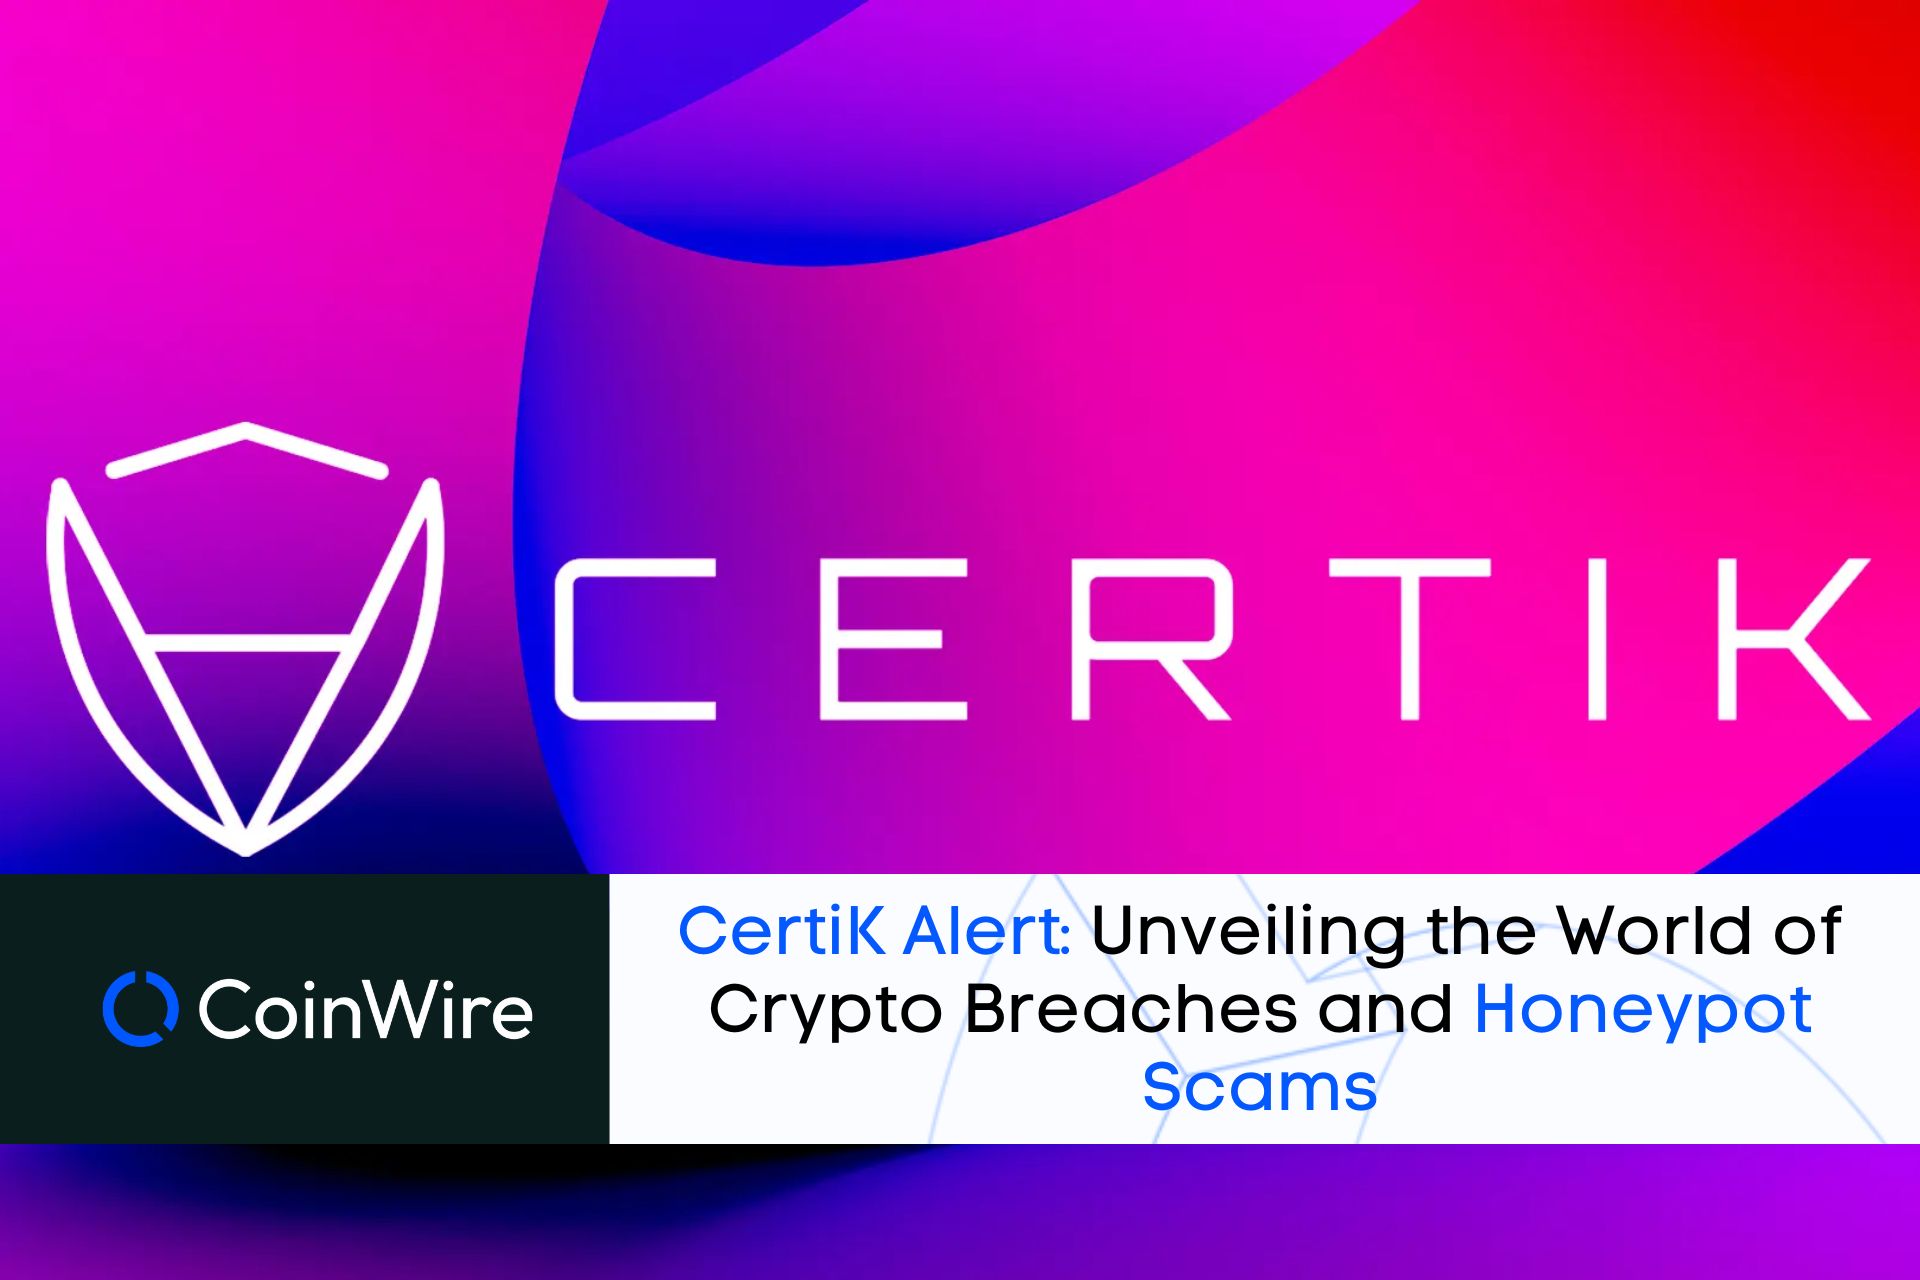 Certik Alert: Unveiling The World Of Crypto Breaches And Honeypot Scams